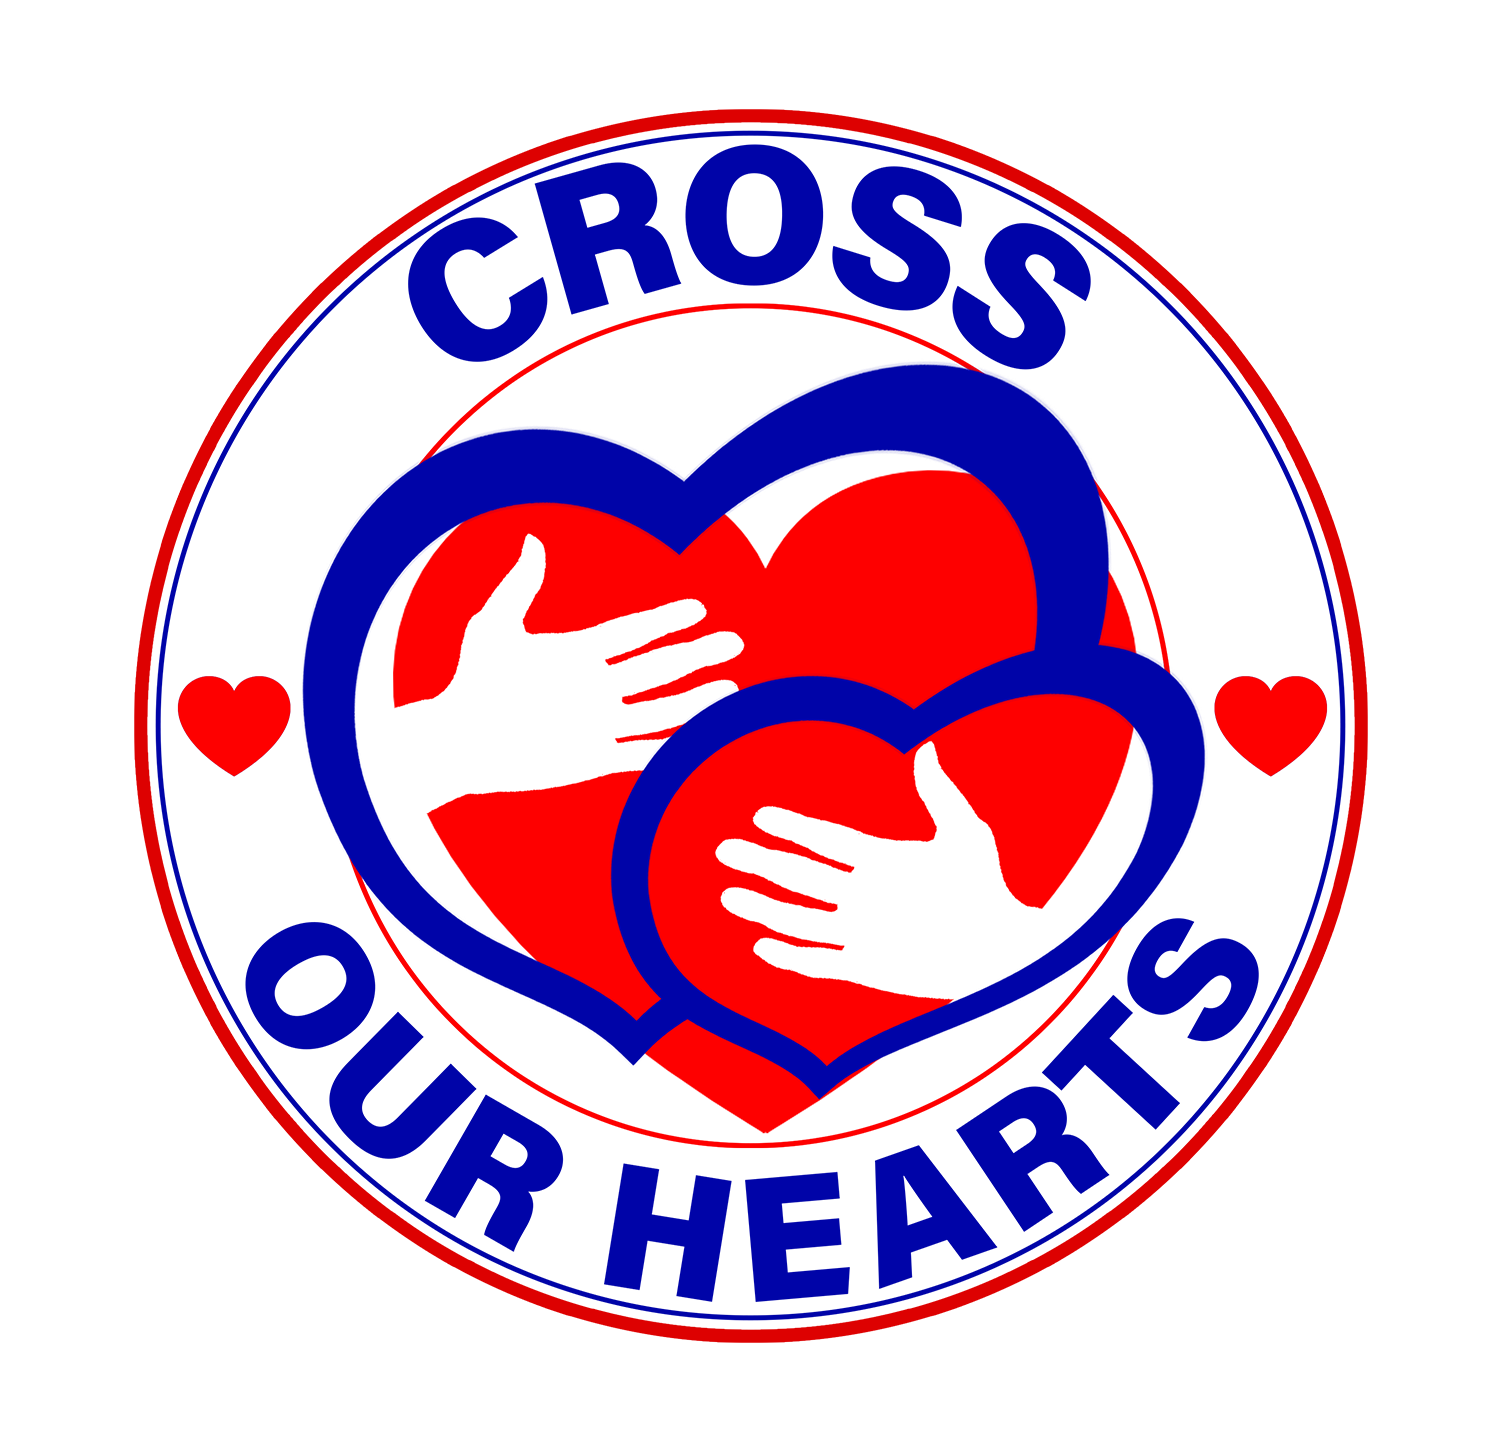 CROSS OUR HEARTS LOGO 5 inch transparent